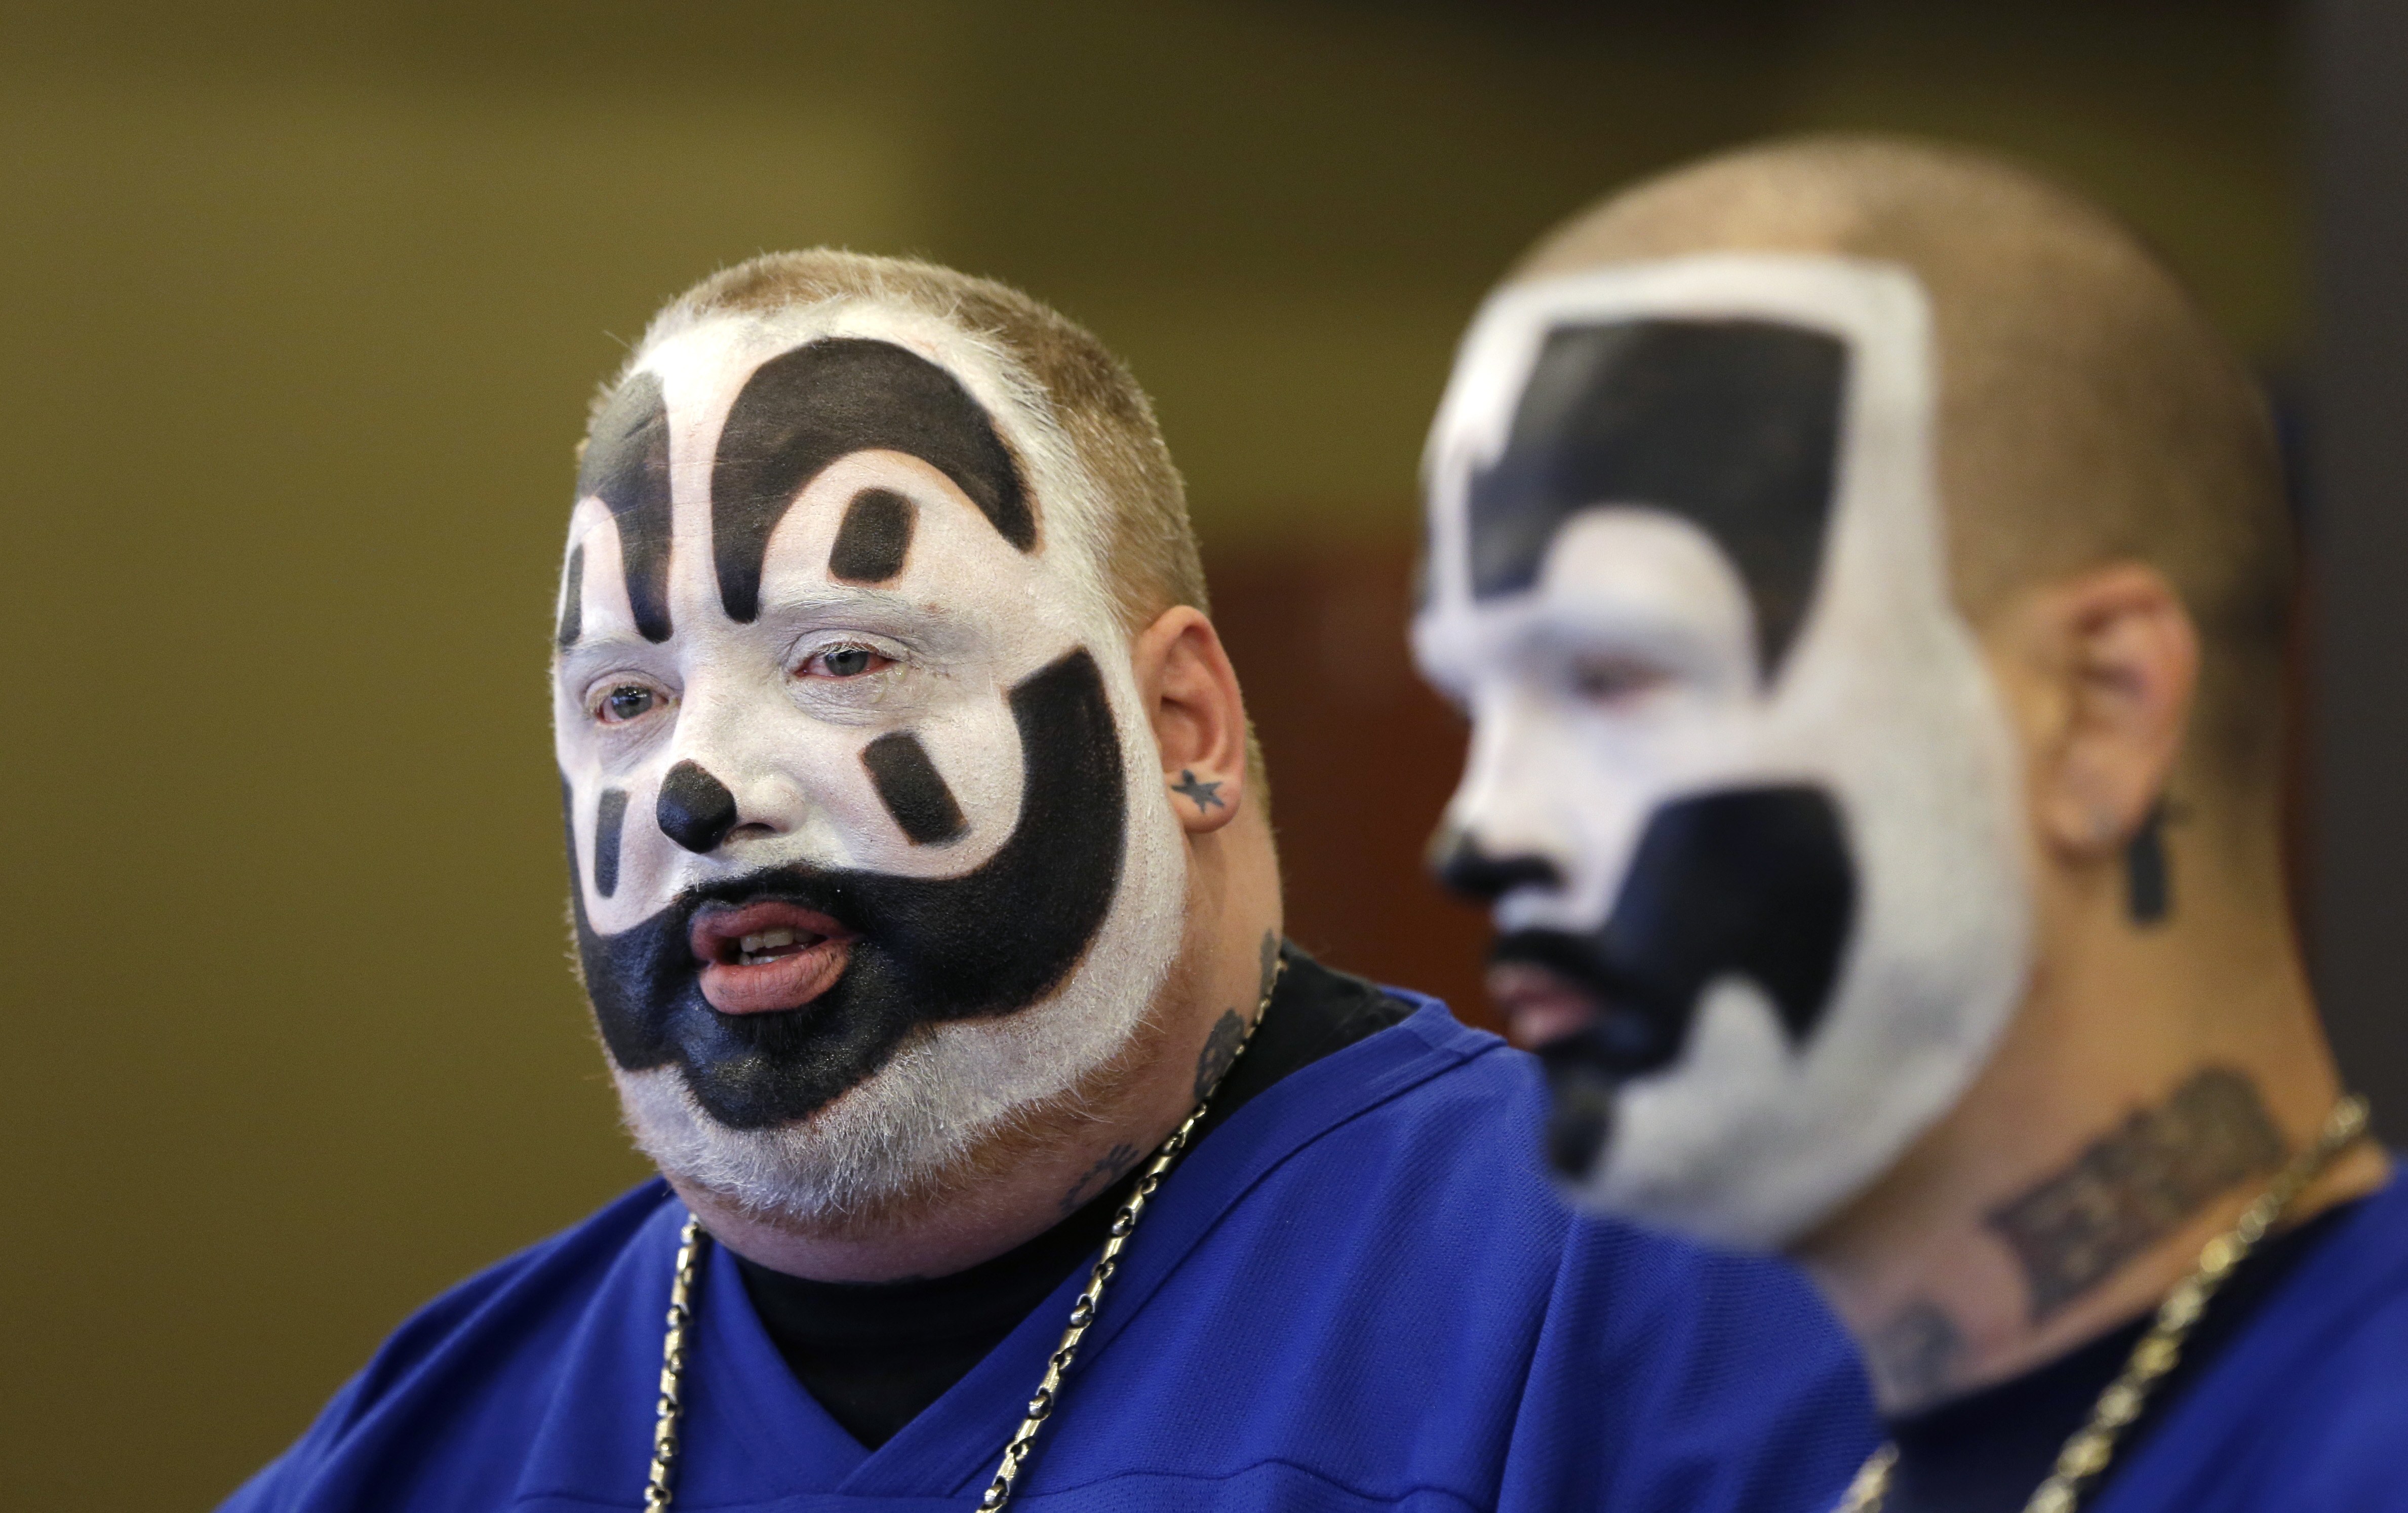 juggalo and juggalette rules